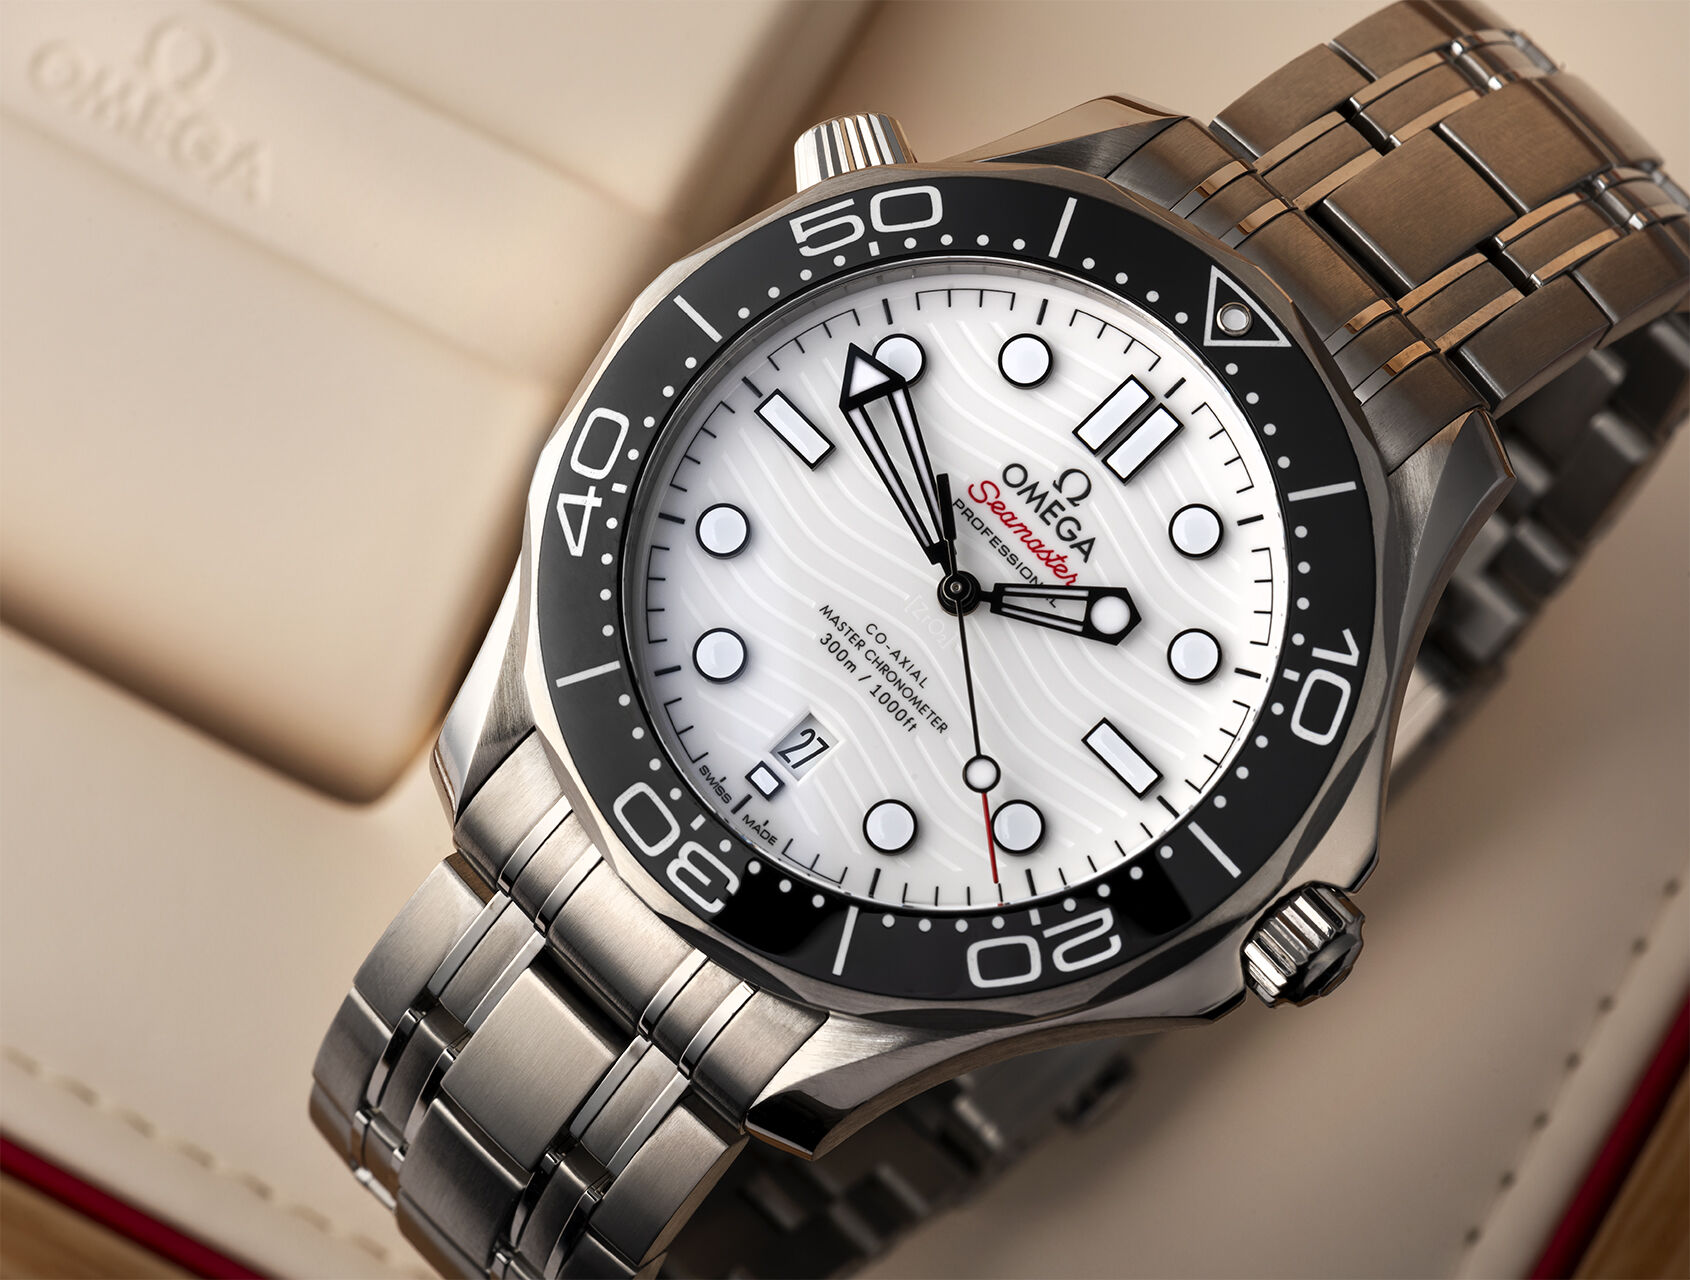 Omega Seamaster 300 Watches | ref 210.30.42.20.04.001 | 210.30.42.20.04.001  - Box u0026 Papers | The Watch Club